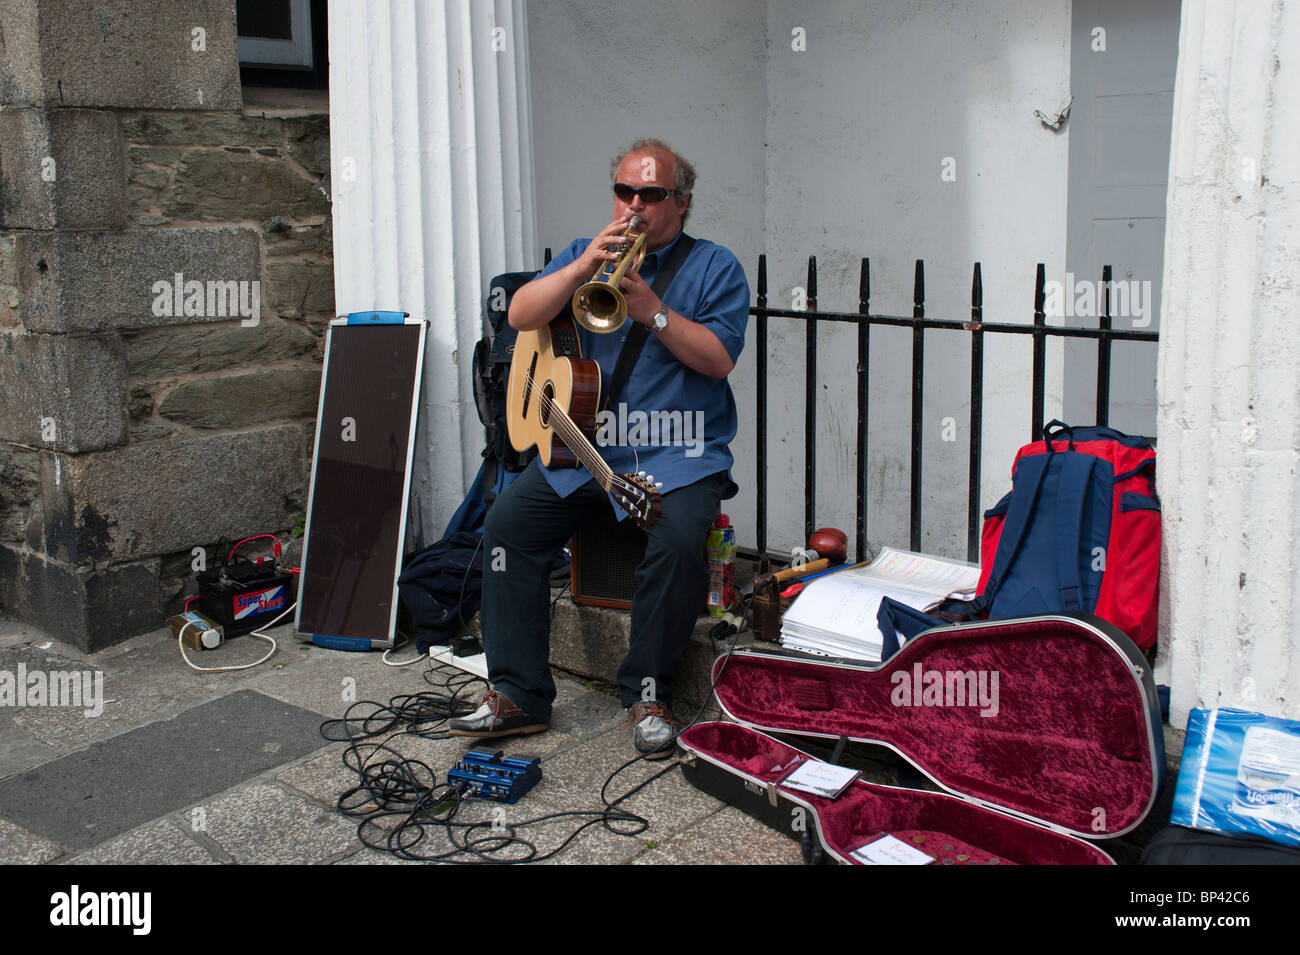 A busker performing in Falmouth, using solar cells and inverter for power Stock Photo